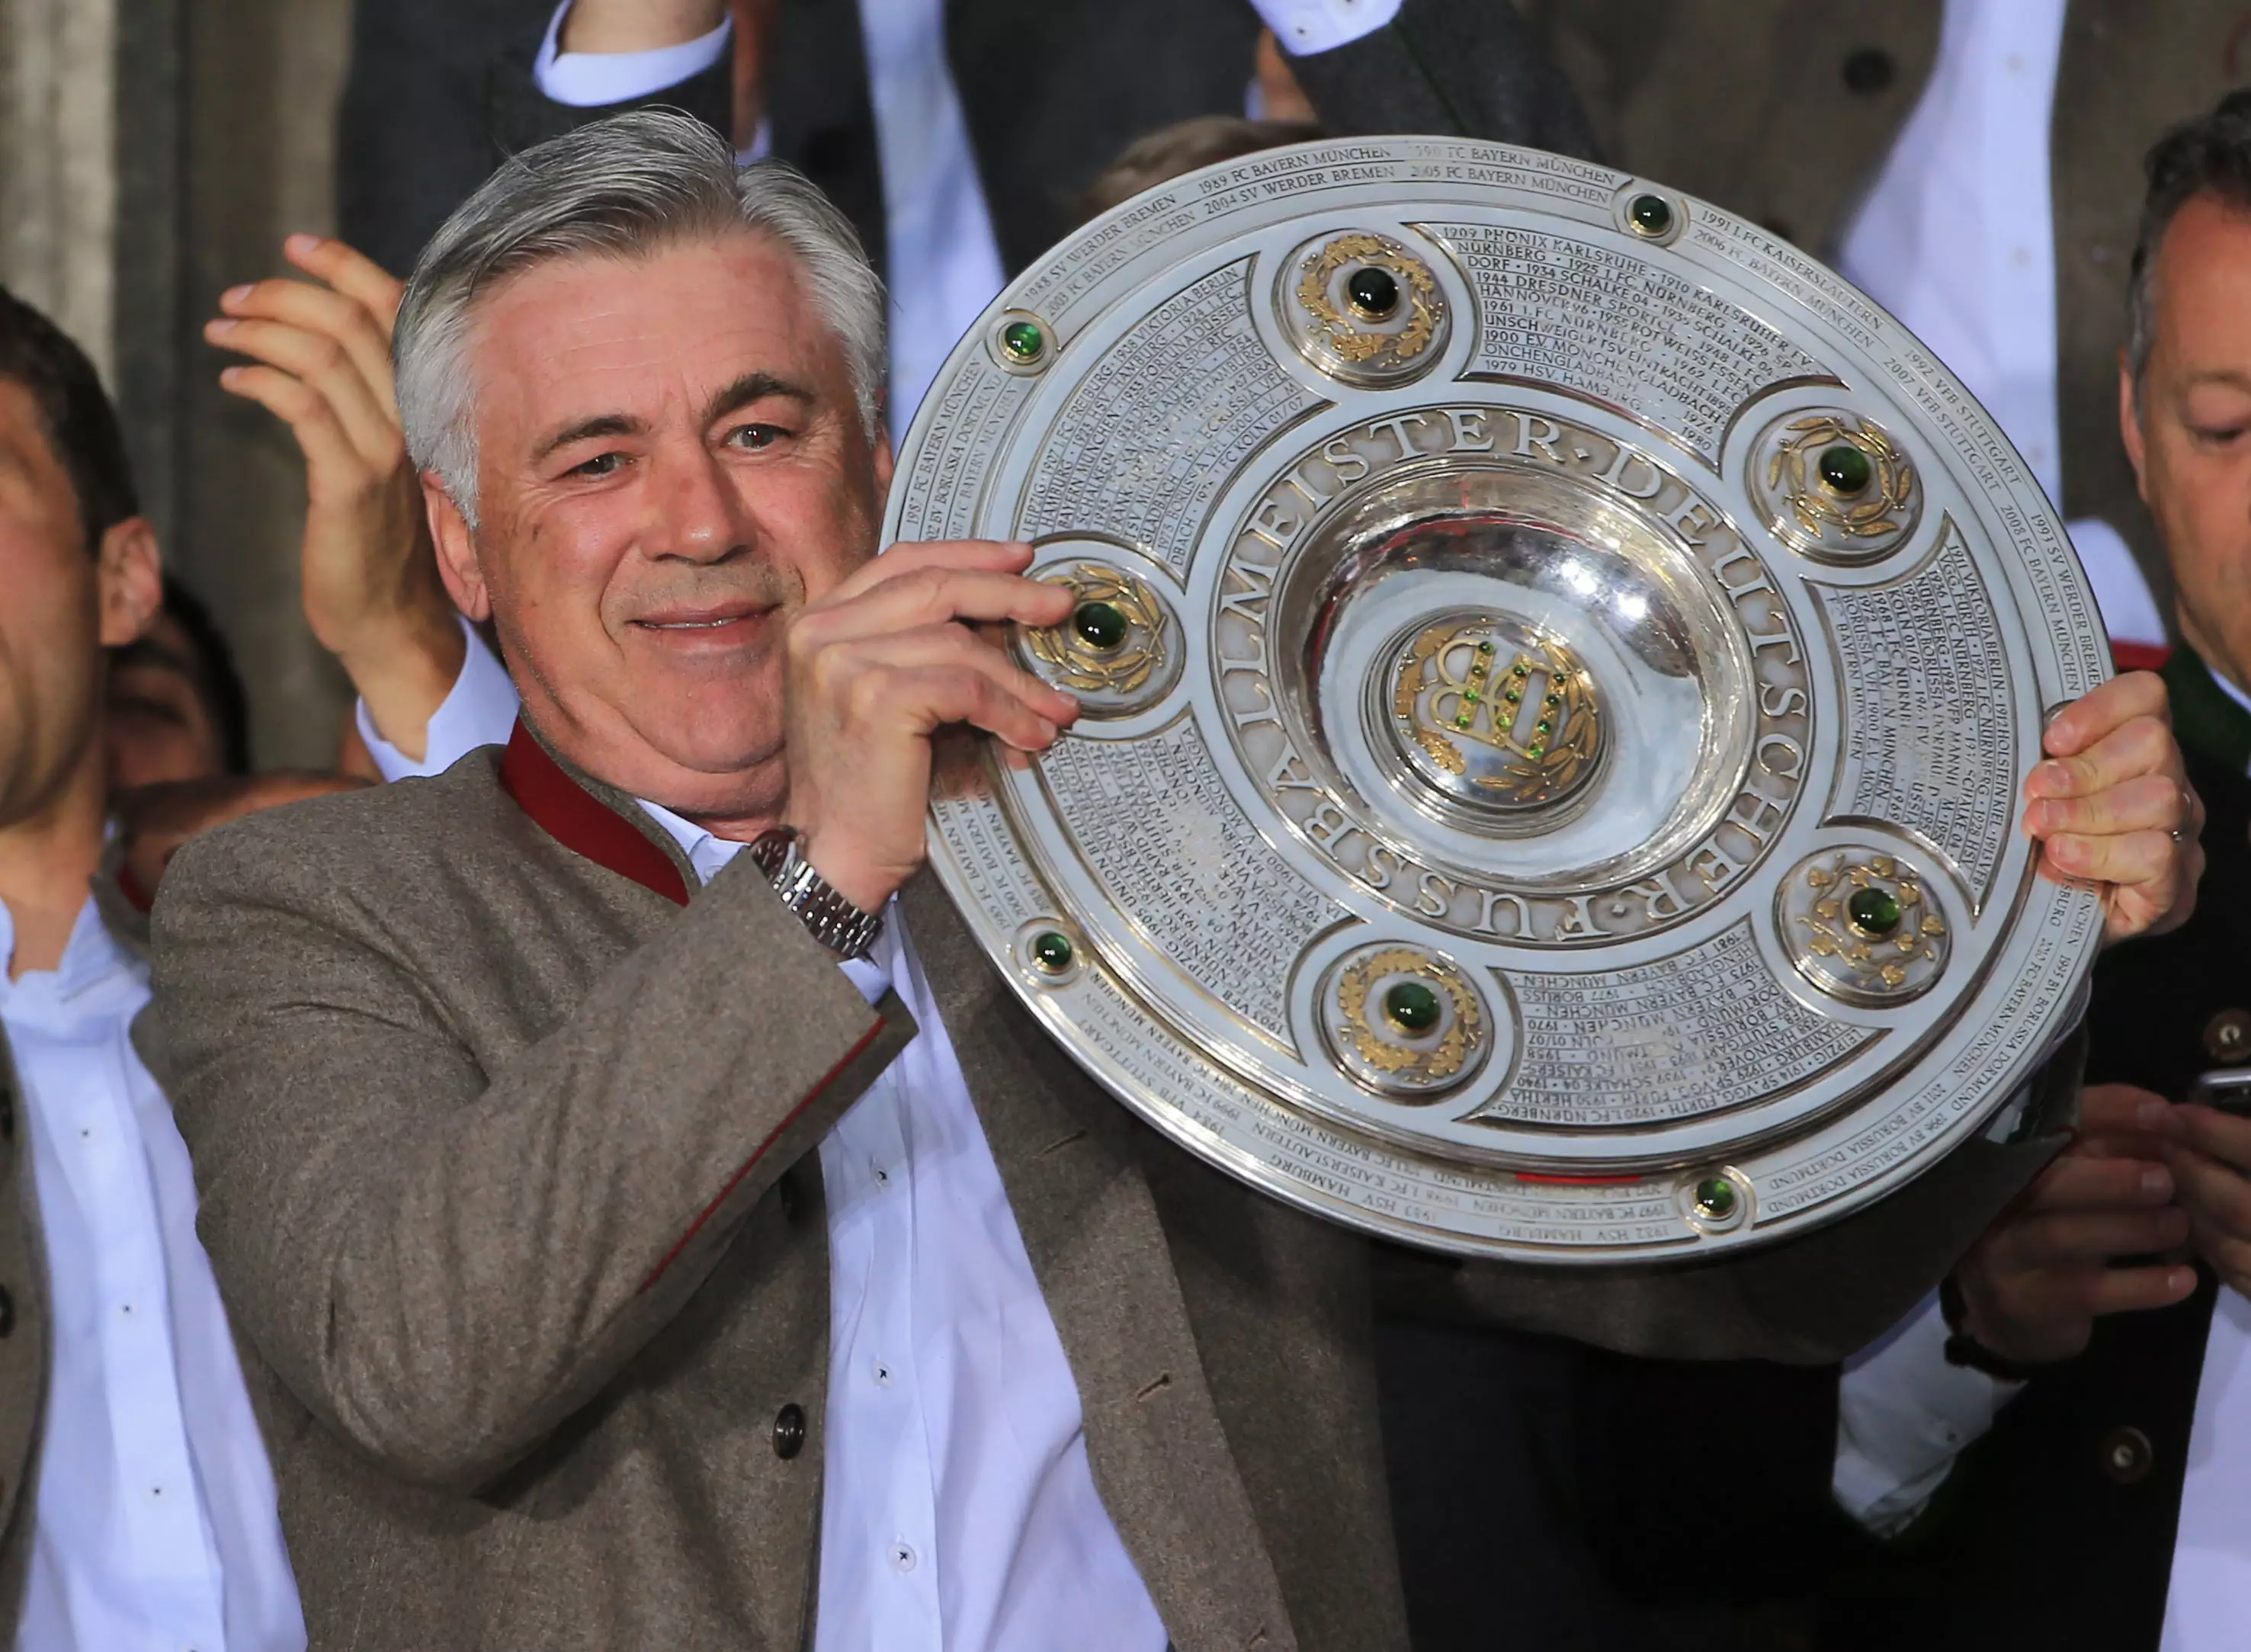 It's not that long ago that Ancelotti was winning the Bundesliga. Image: PA Images.